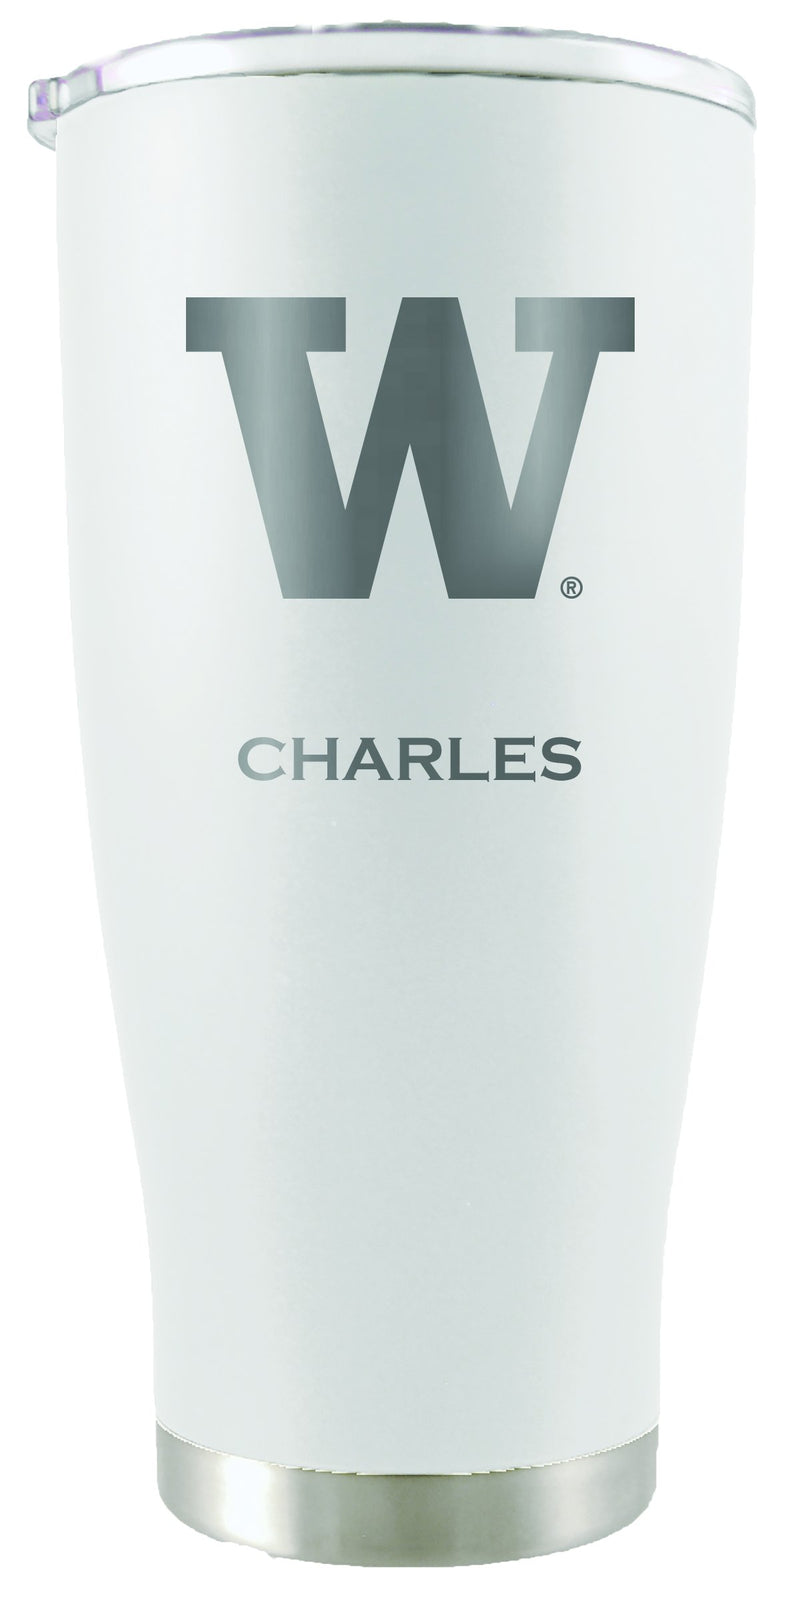 20oz White Personalized Stainless Steel Tumbler | Washington
COL, CurrentProduct, Drinkware_category_All, Personalized_Personalized, UWA, Washington Huskies
The Memory Company